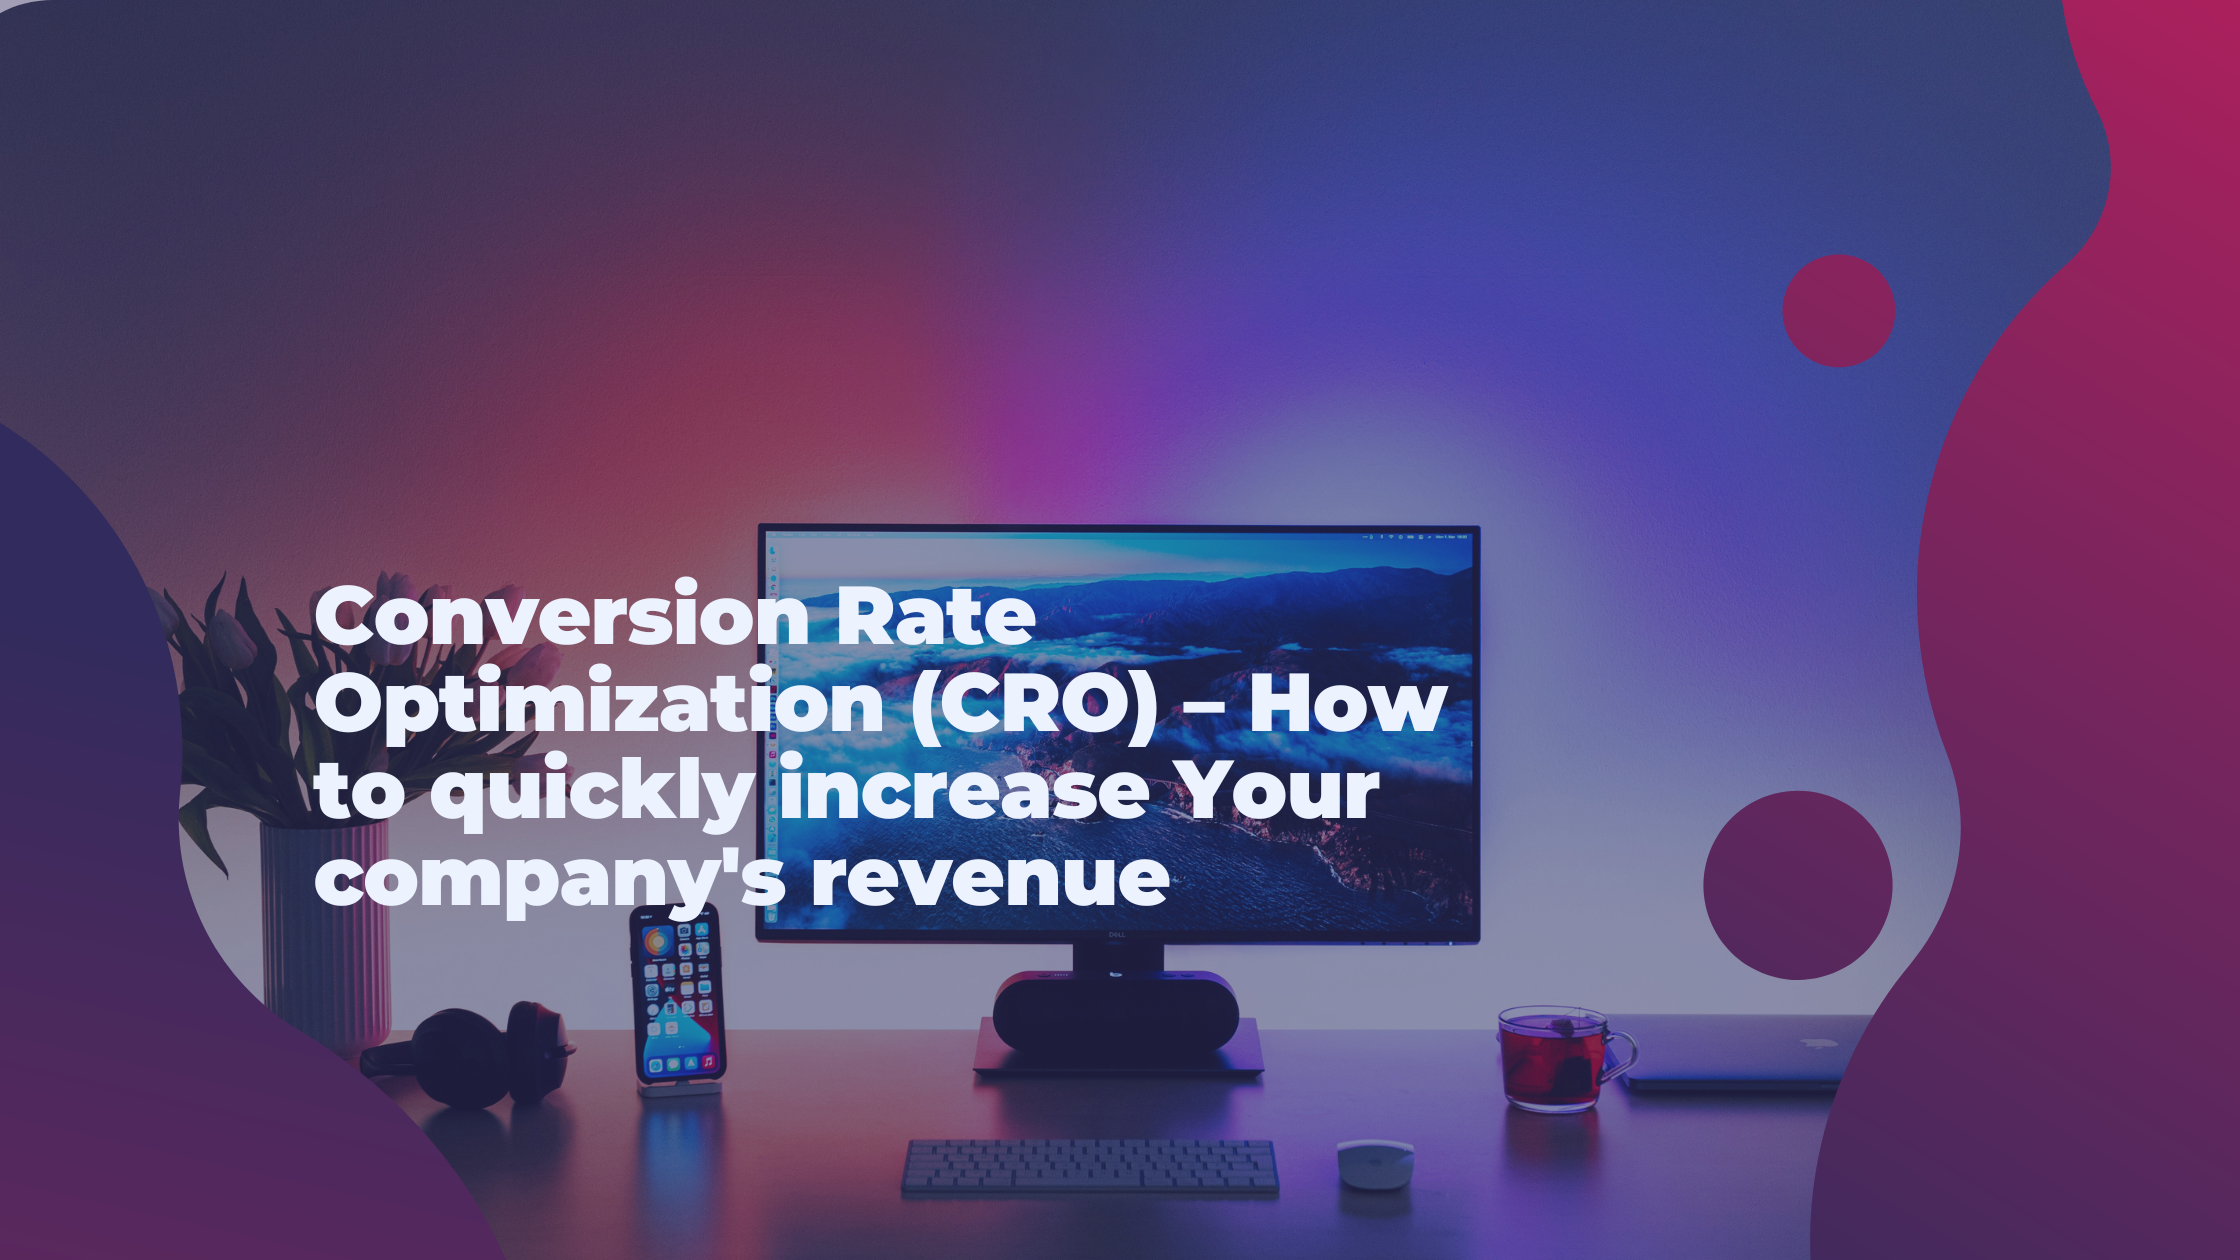 Conversion Rate Optimization (CRO) – How to quickly increase Your company's revenue